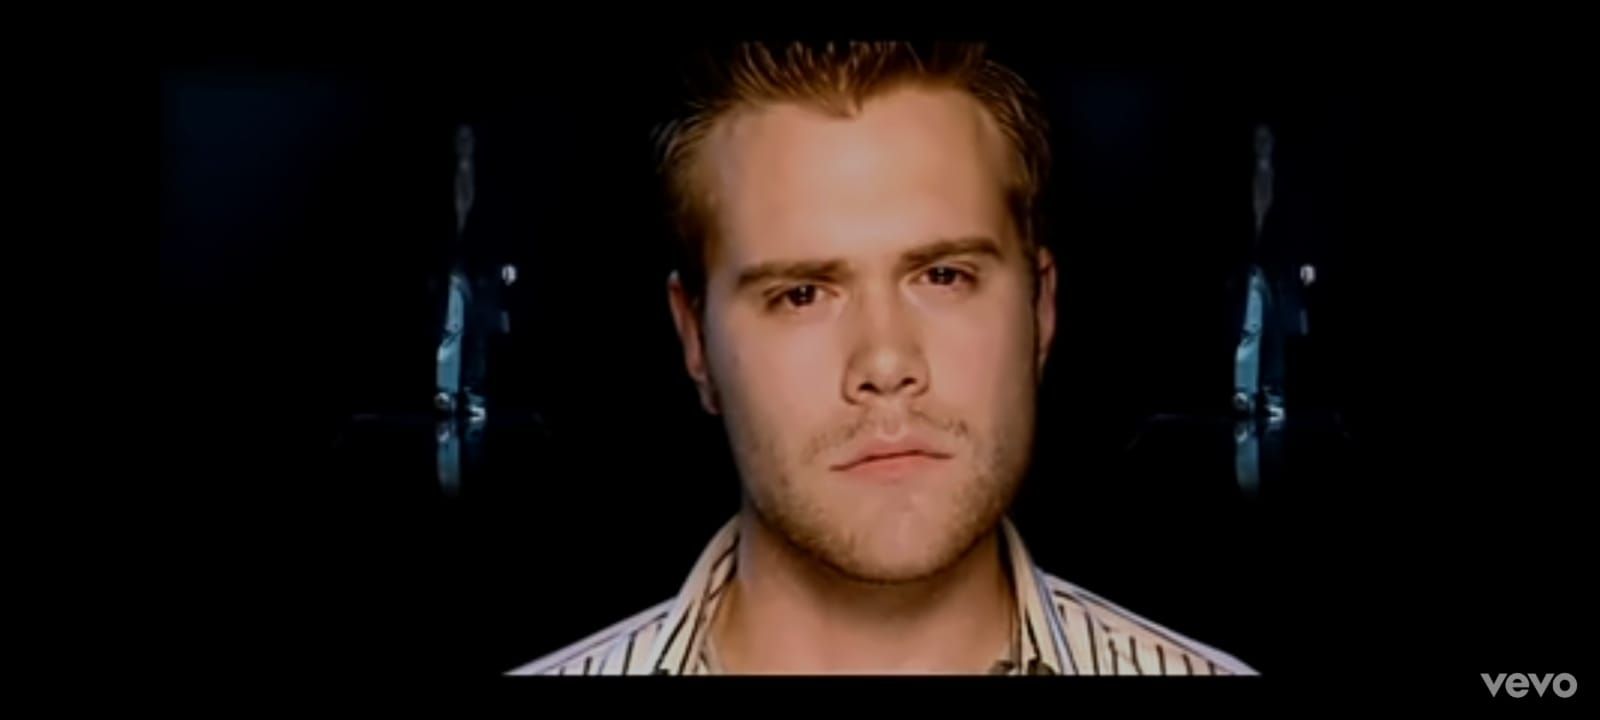 If You're Not the One - Daniel Bedingfield